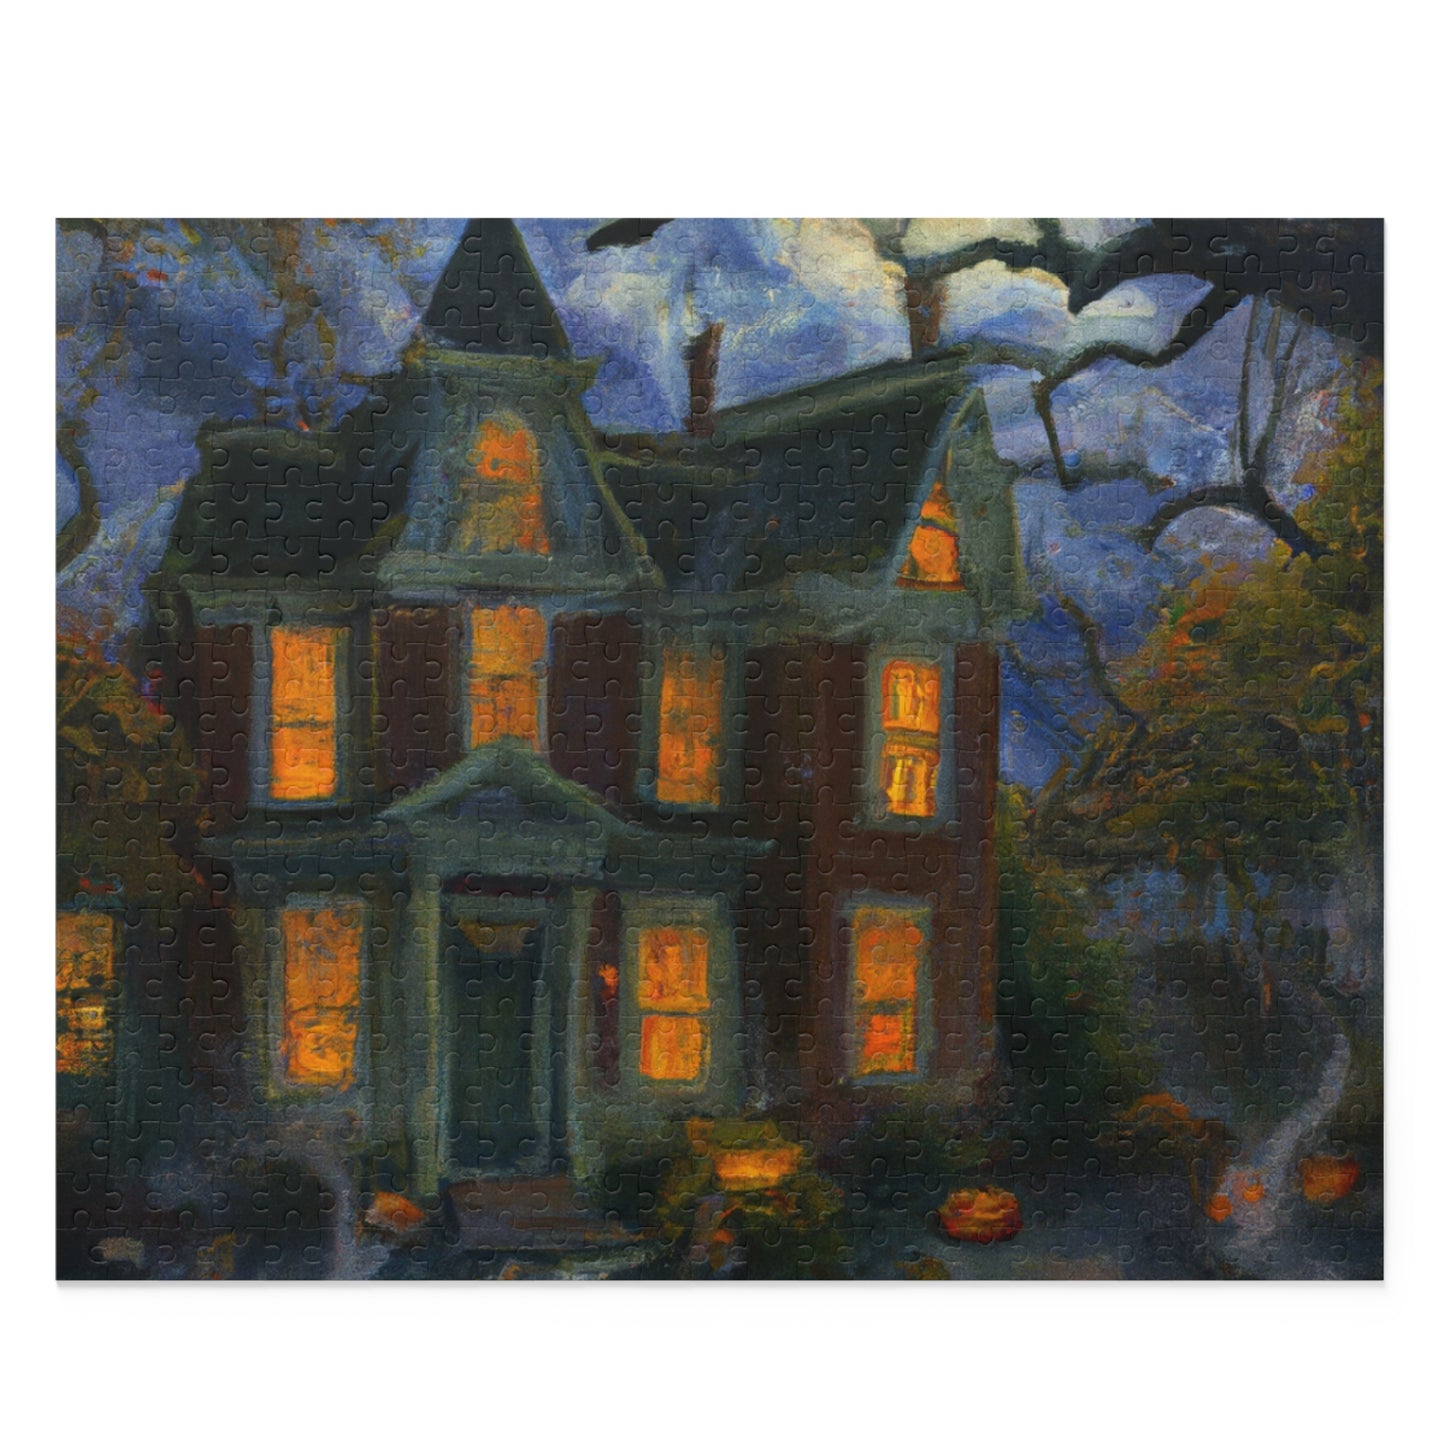 The Haunted Mansion  - JigSaw Puzzle 500 Piece: Emmeline Nightshade - Halloween Gift | Spooky Scenes